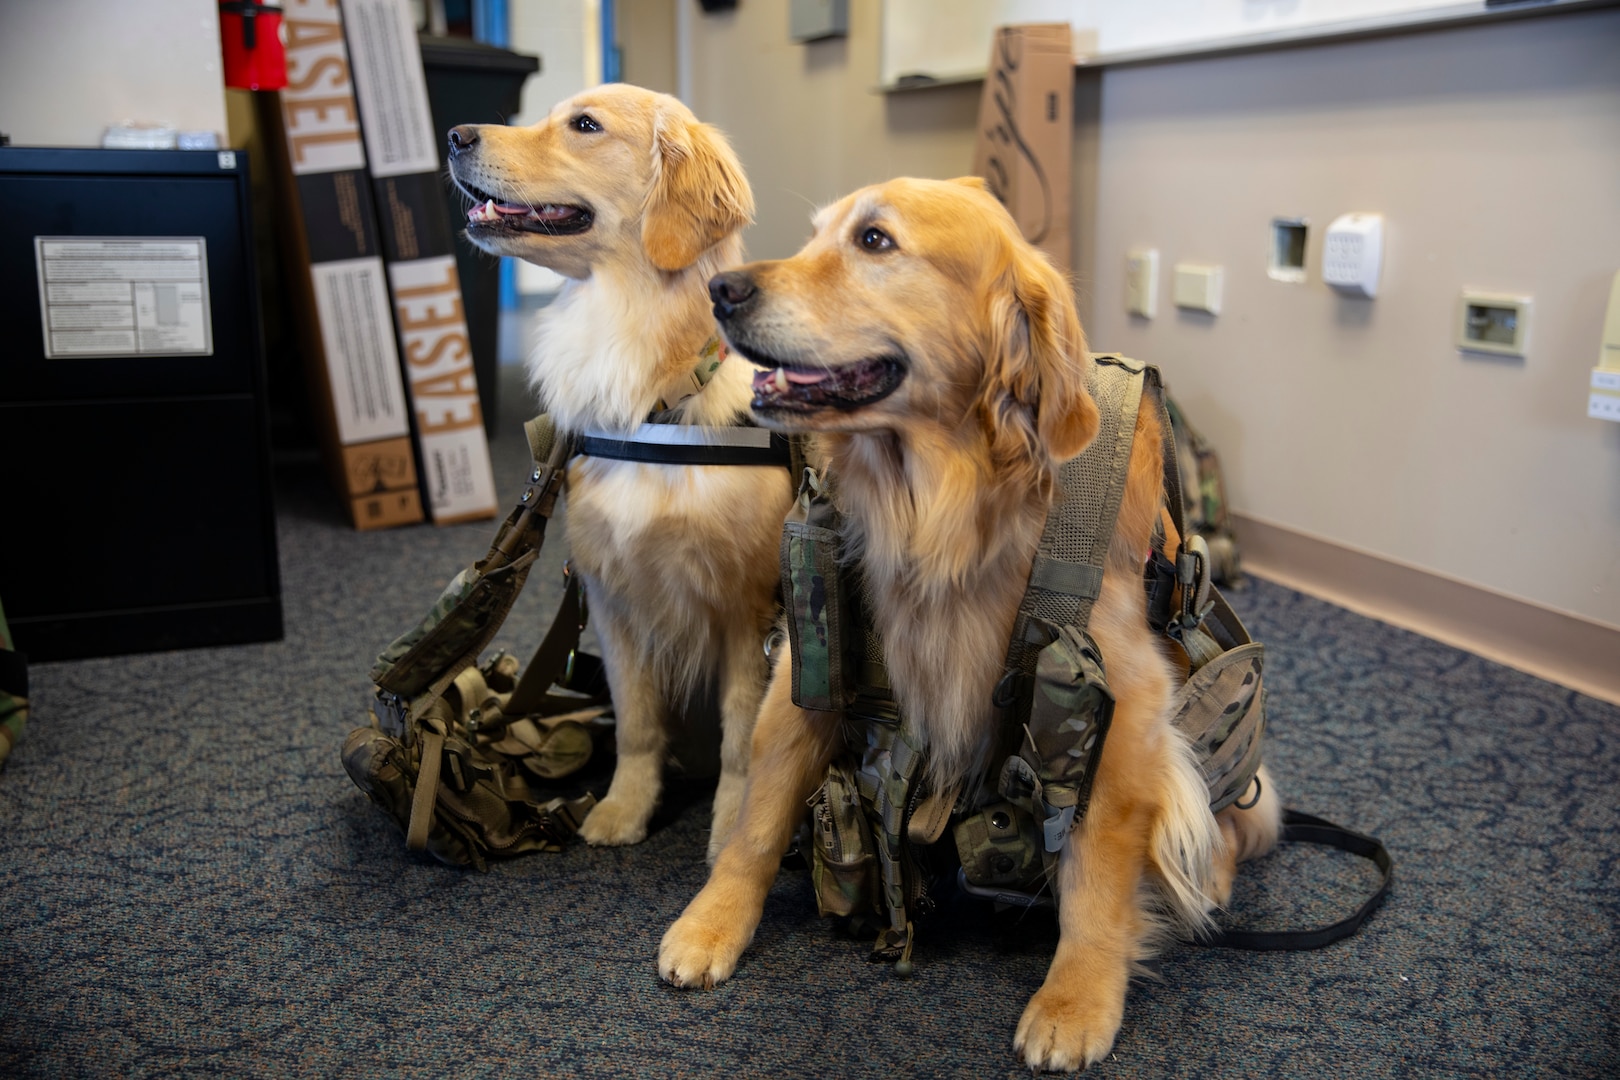 The District of Columbia Army Aviation hosted a wellness event featuring veteran and content creator Kavin Bubolz along with his dogs Emma and Ellie March 10, 2024 at the Army Aviation Support Facility on Fort Belvoir.